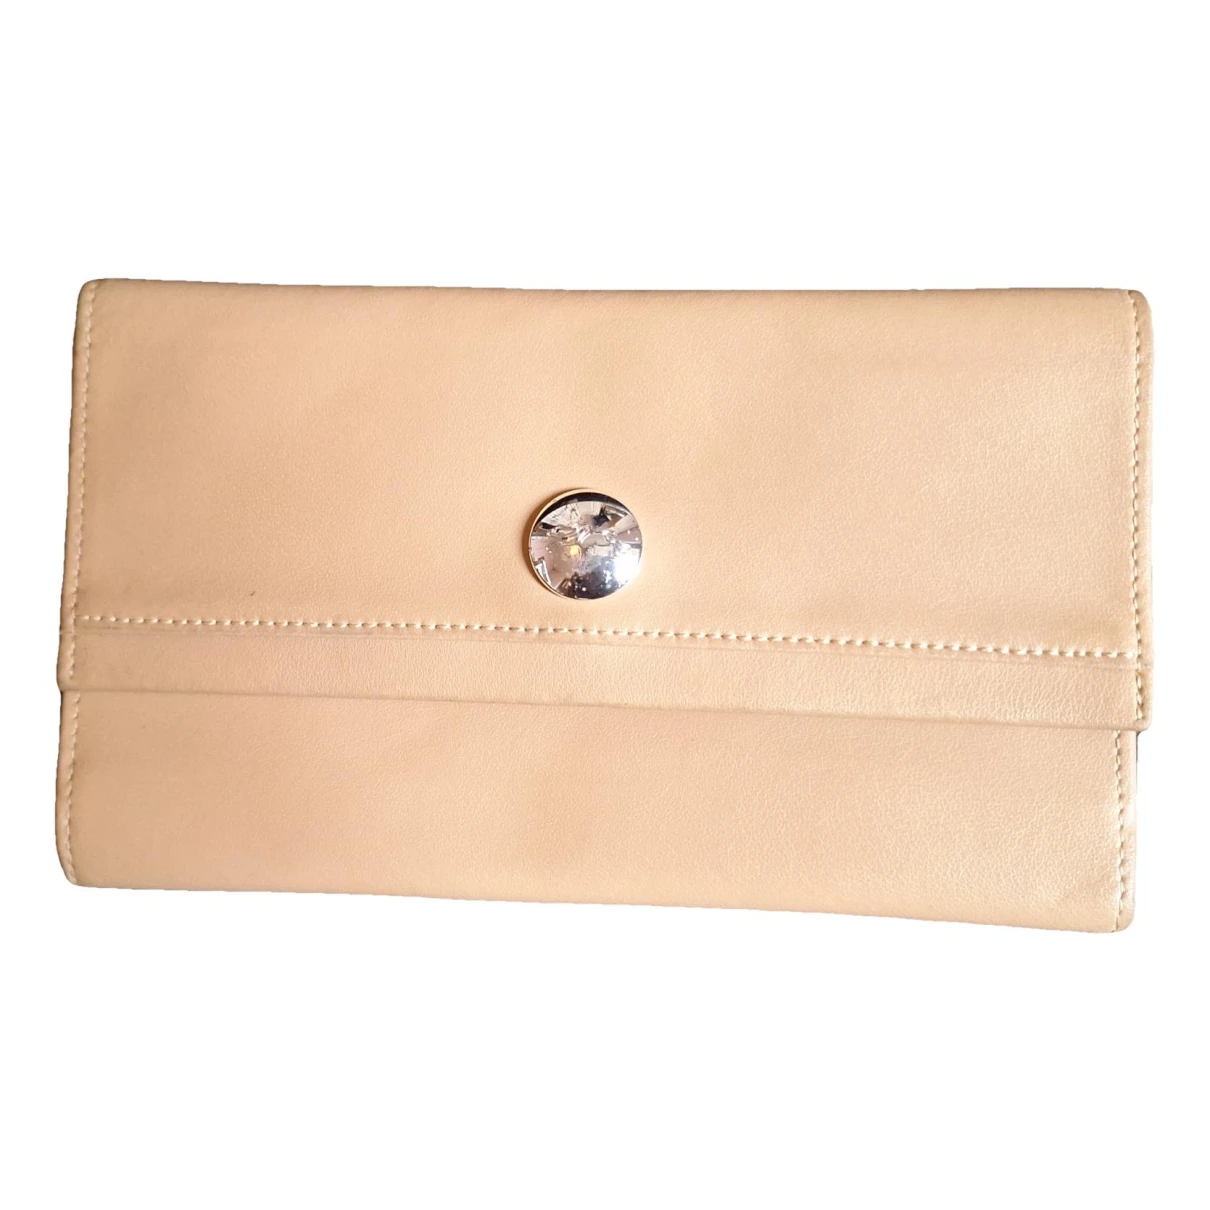 Pre-owned Longchamp Leather Clutch In Beige